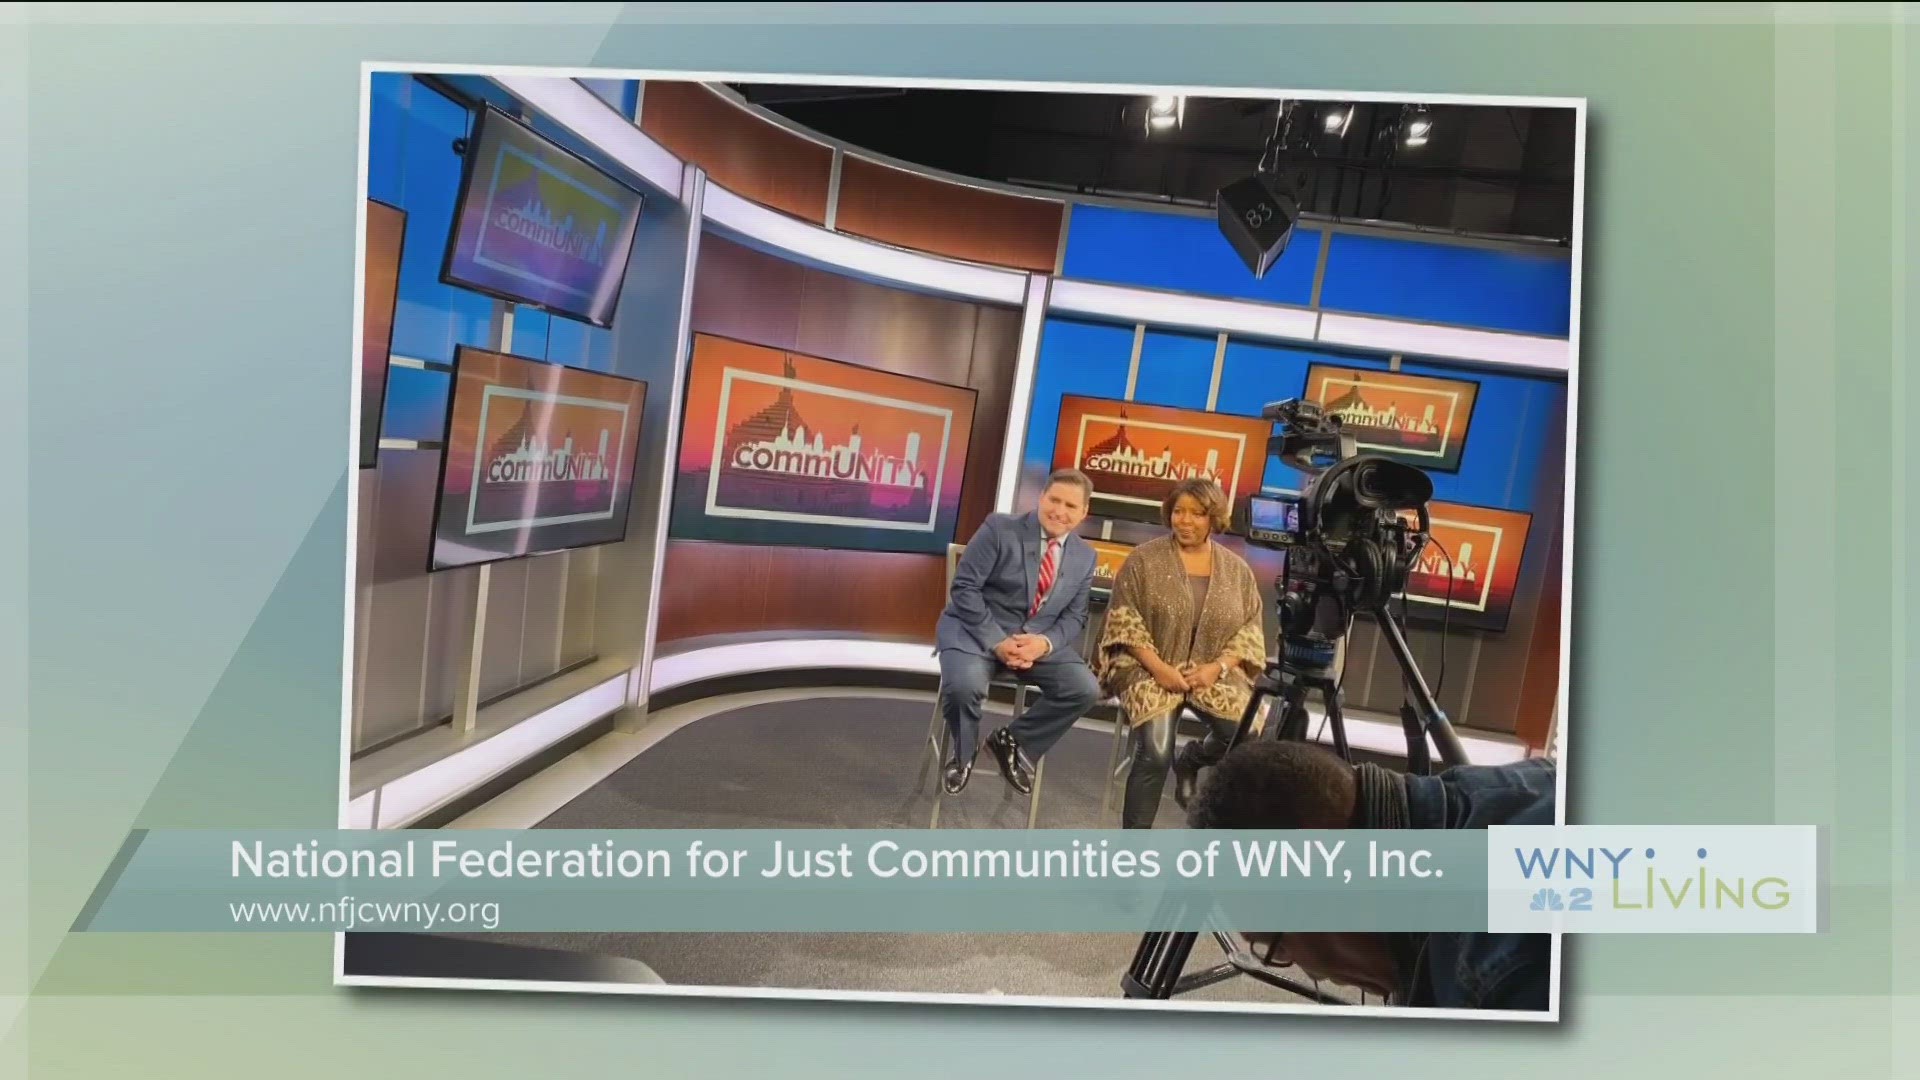 WNY Living - March 11th - NFJC WNY  - THIS VIDEO IS SPONOSORED BY NFJC WNY